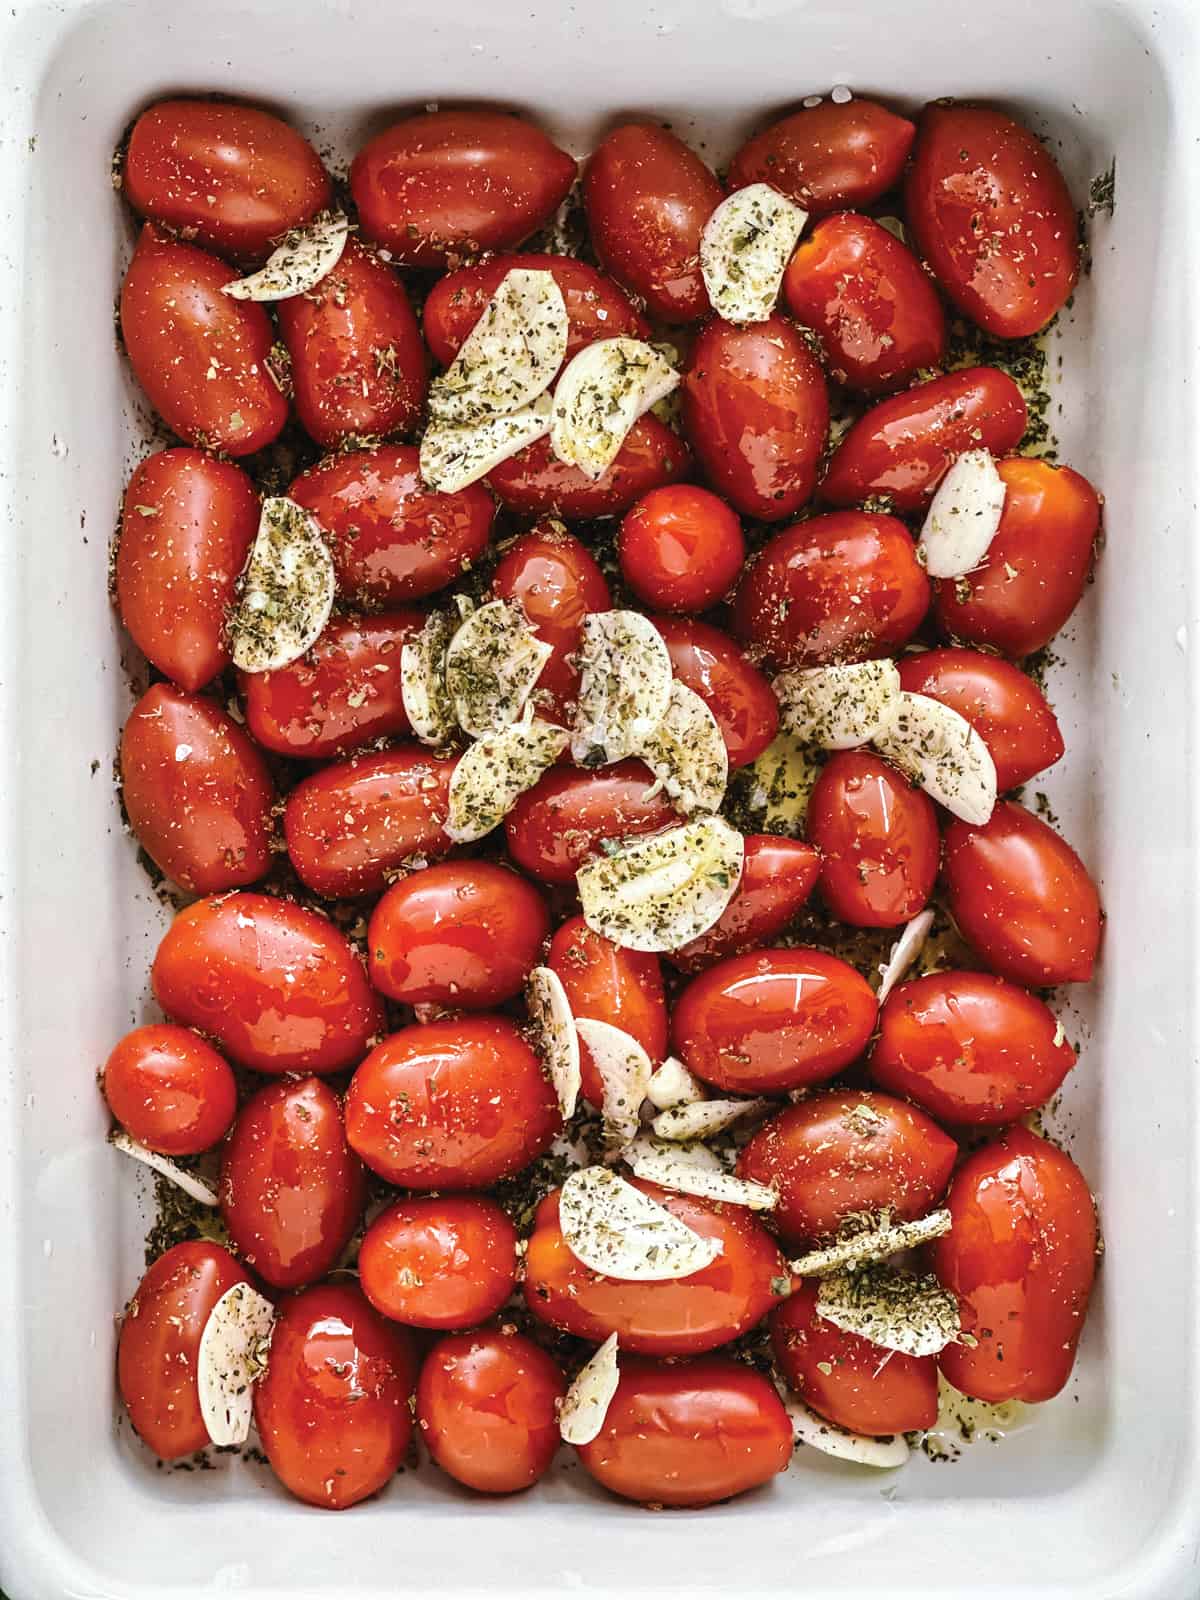 Cherry tomatoes in a white baking pan with garlic slices, olive oil and seasoning.